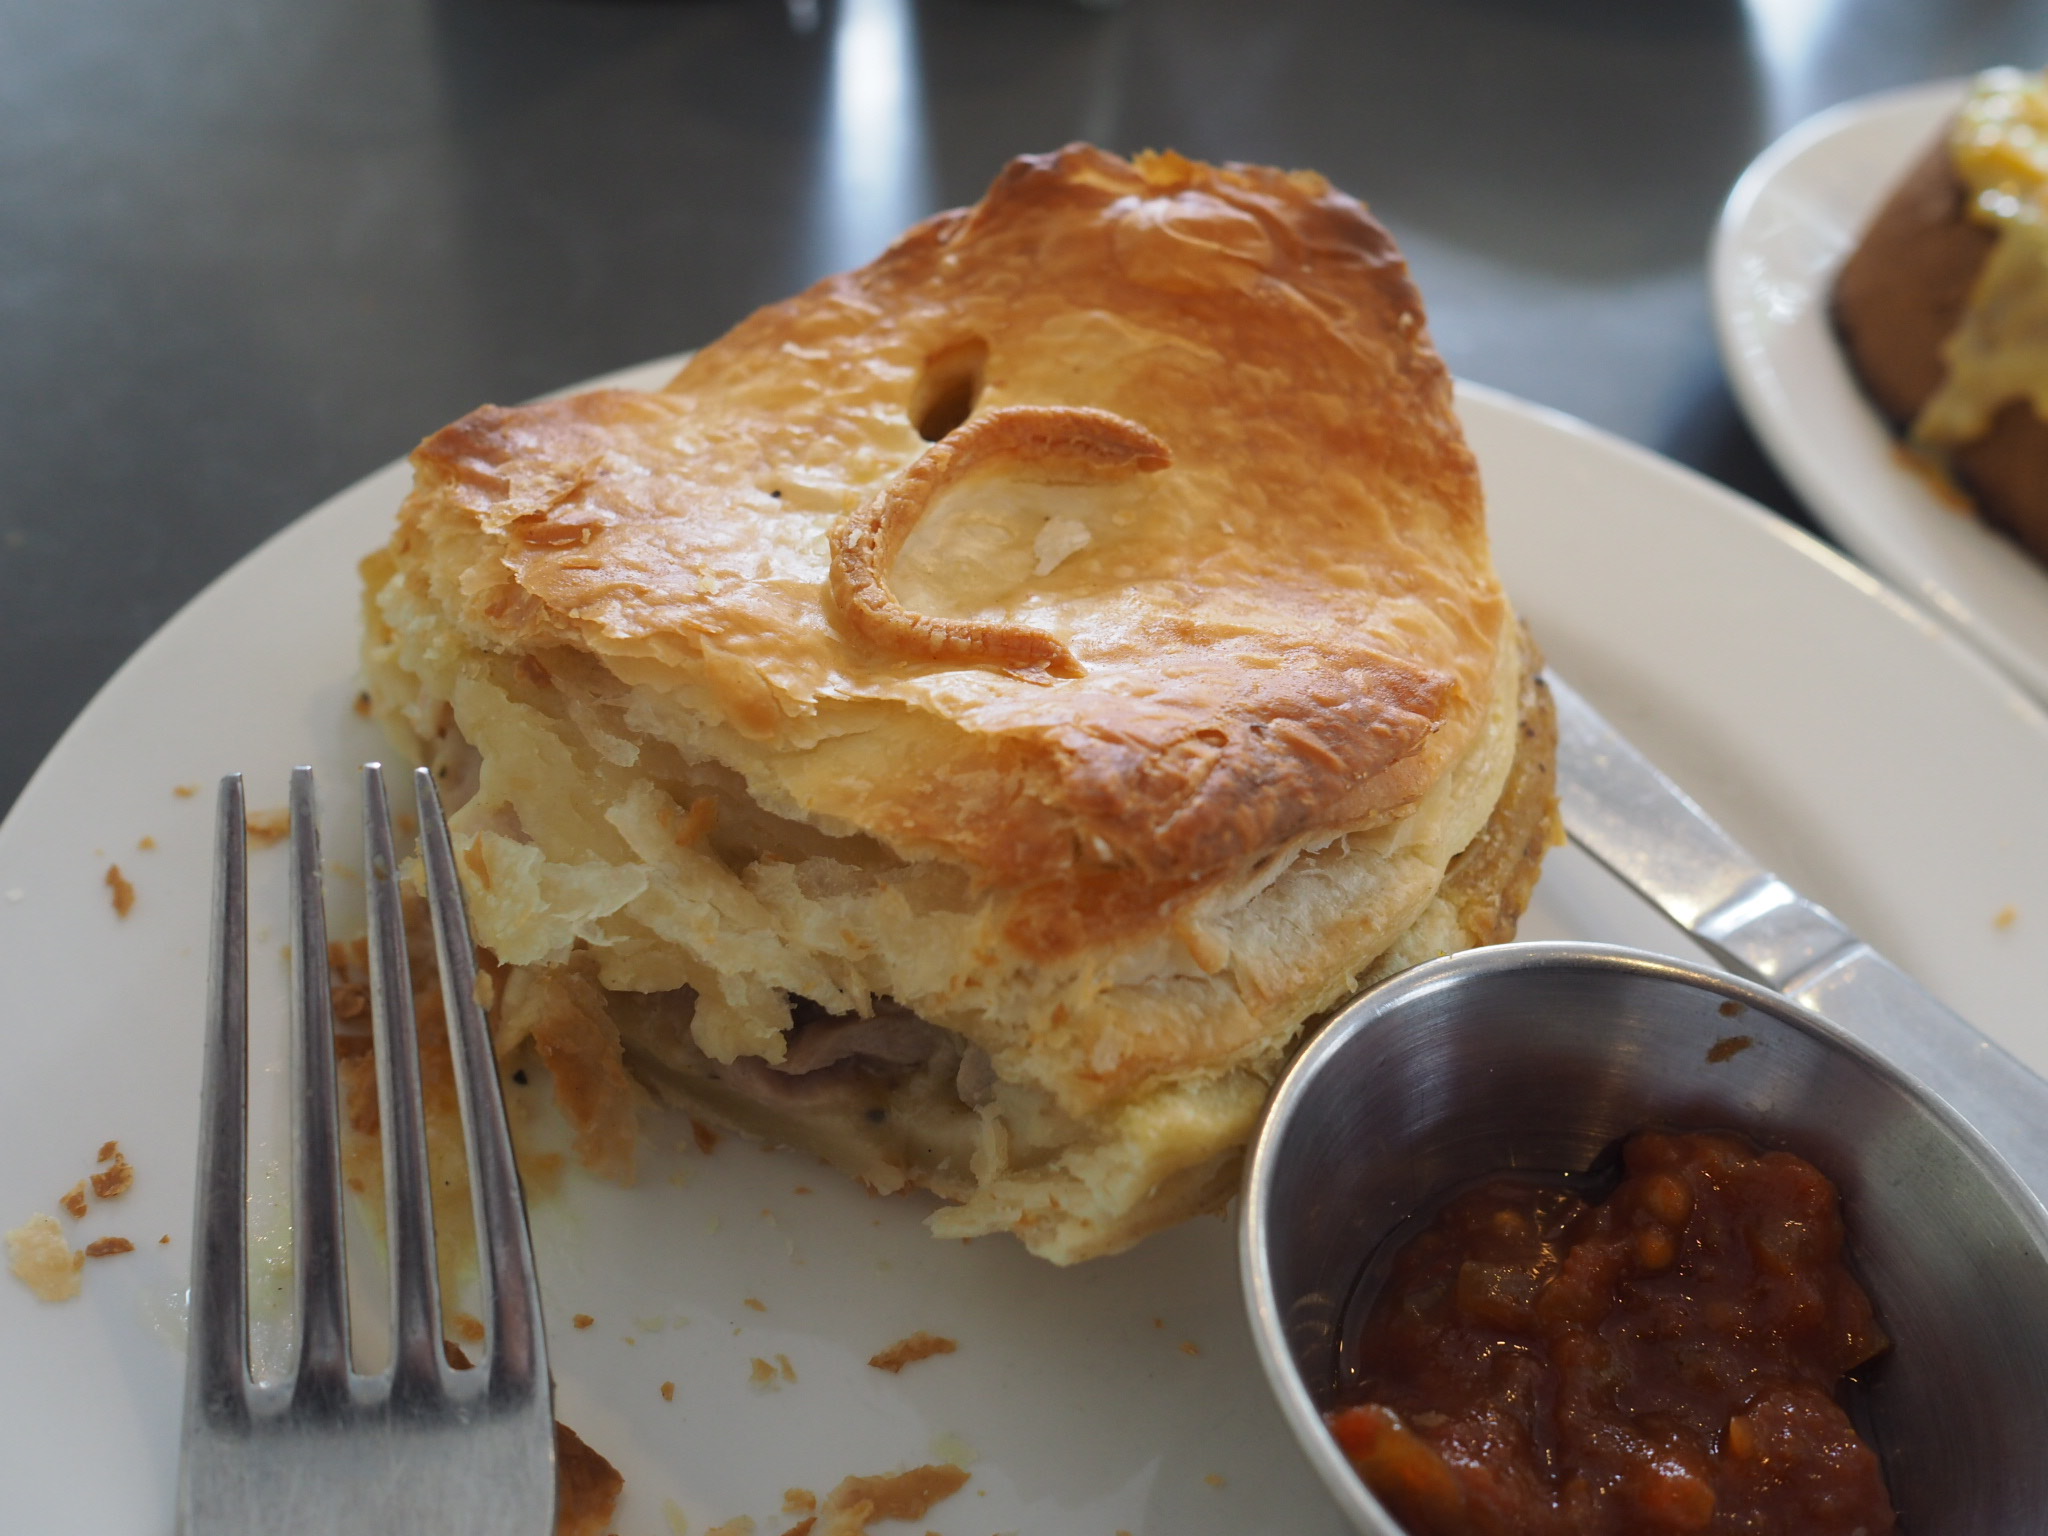 Arrowtown bakery and cafe - Chicken pie 2